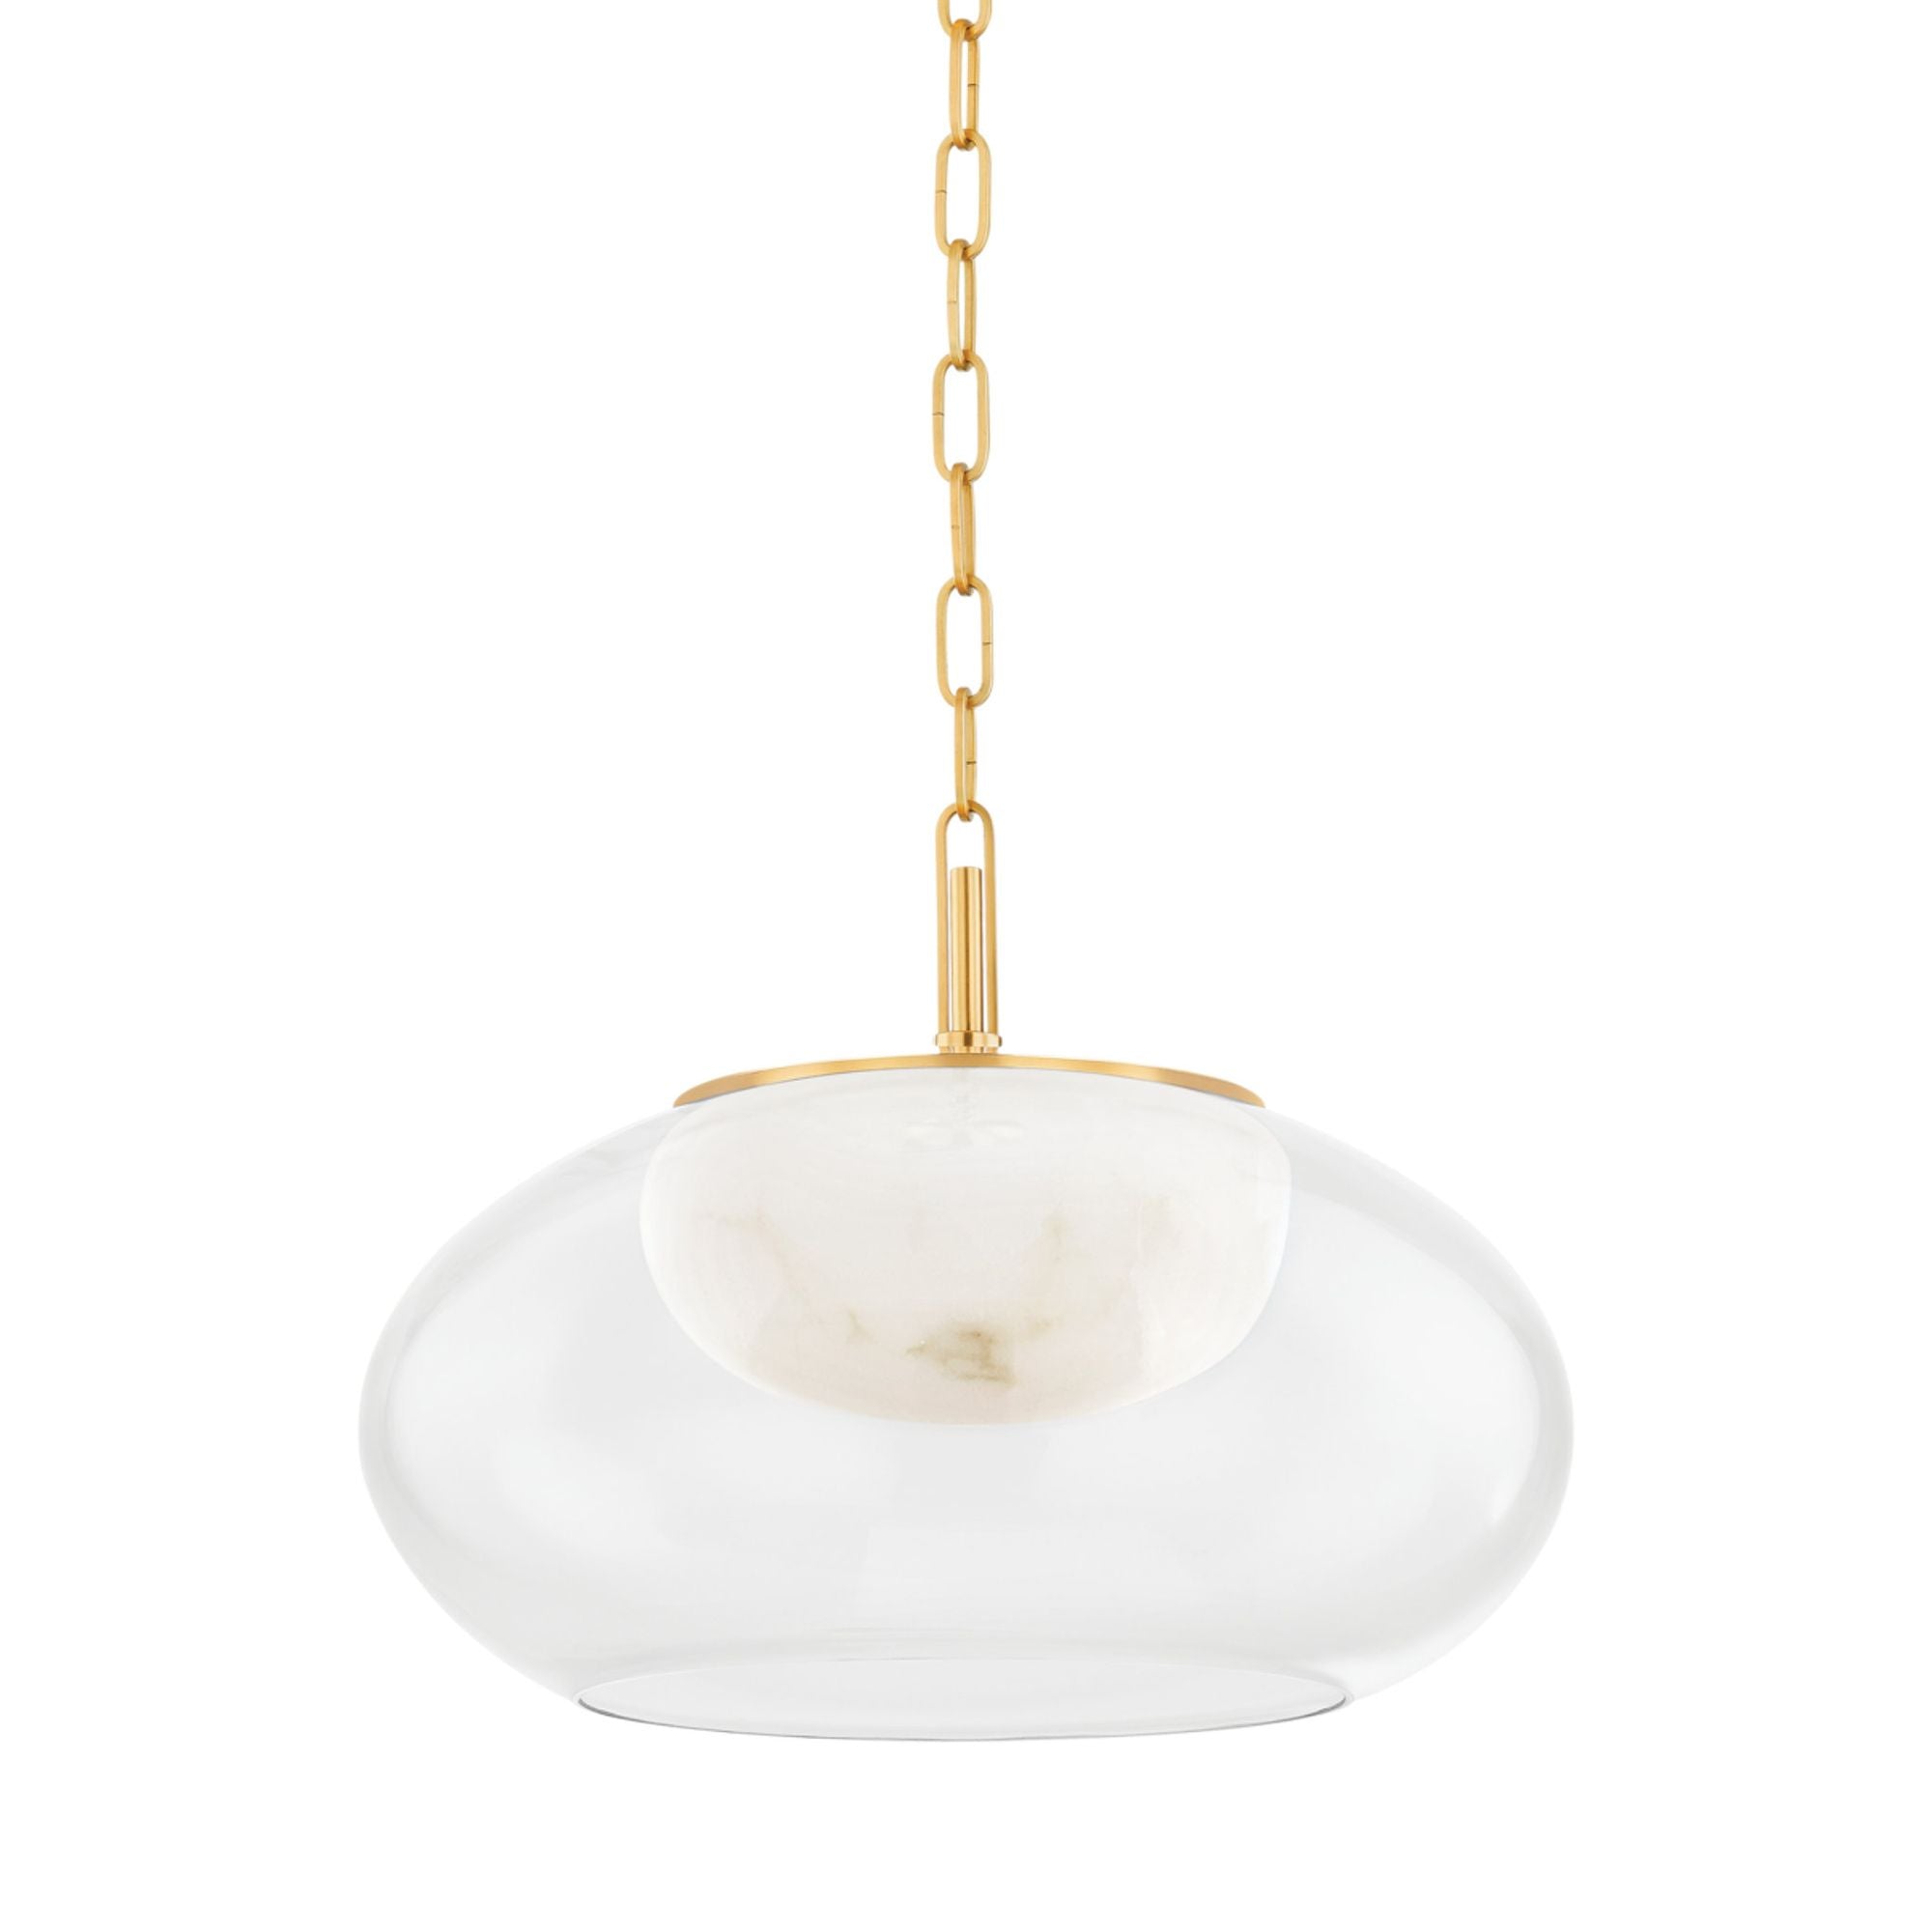 Moore 1 Light Pendant in Aged Brass